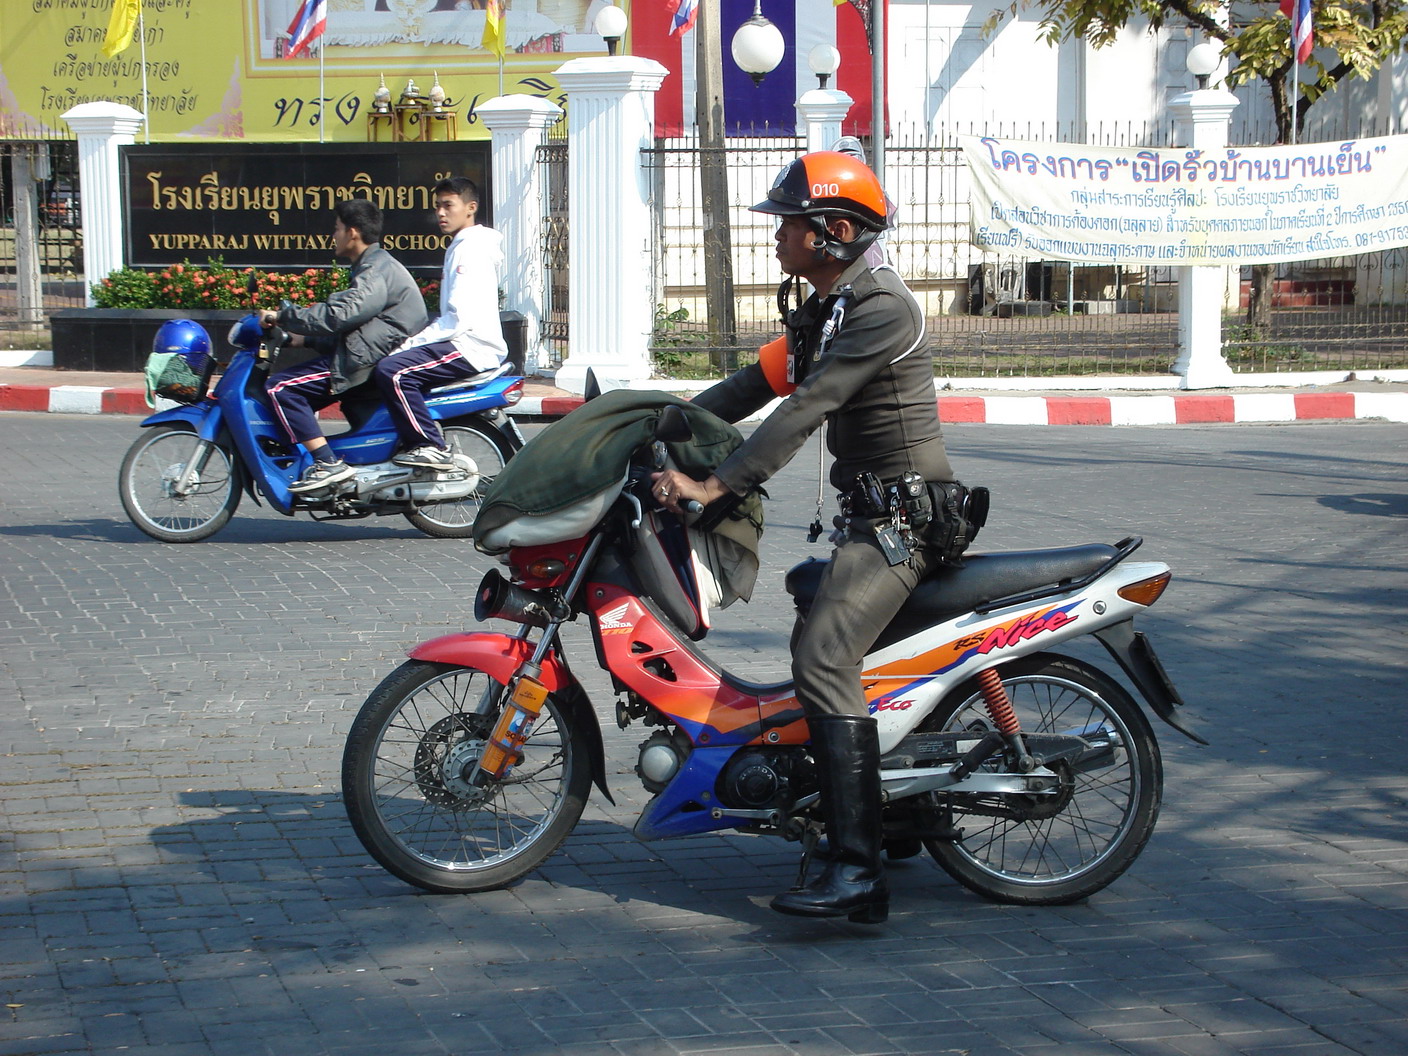 Thai police officer riding a motorcycle